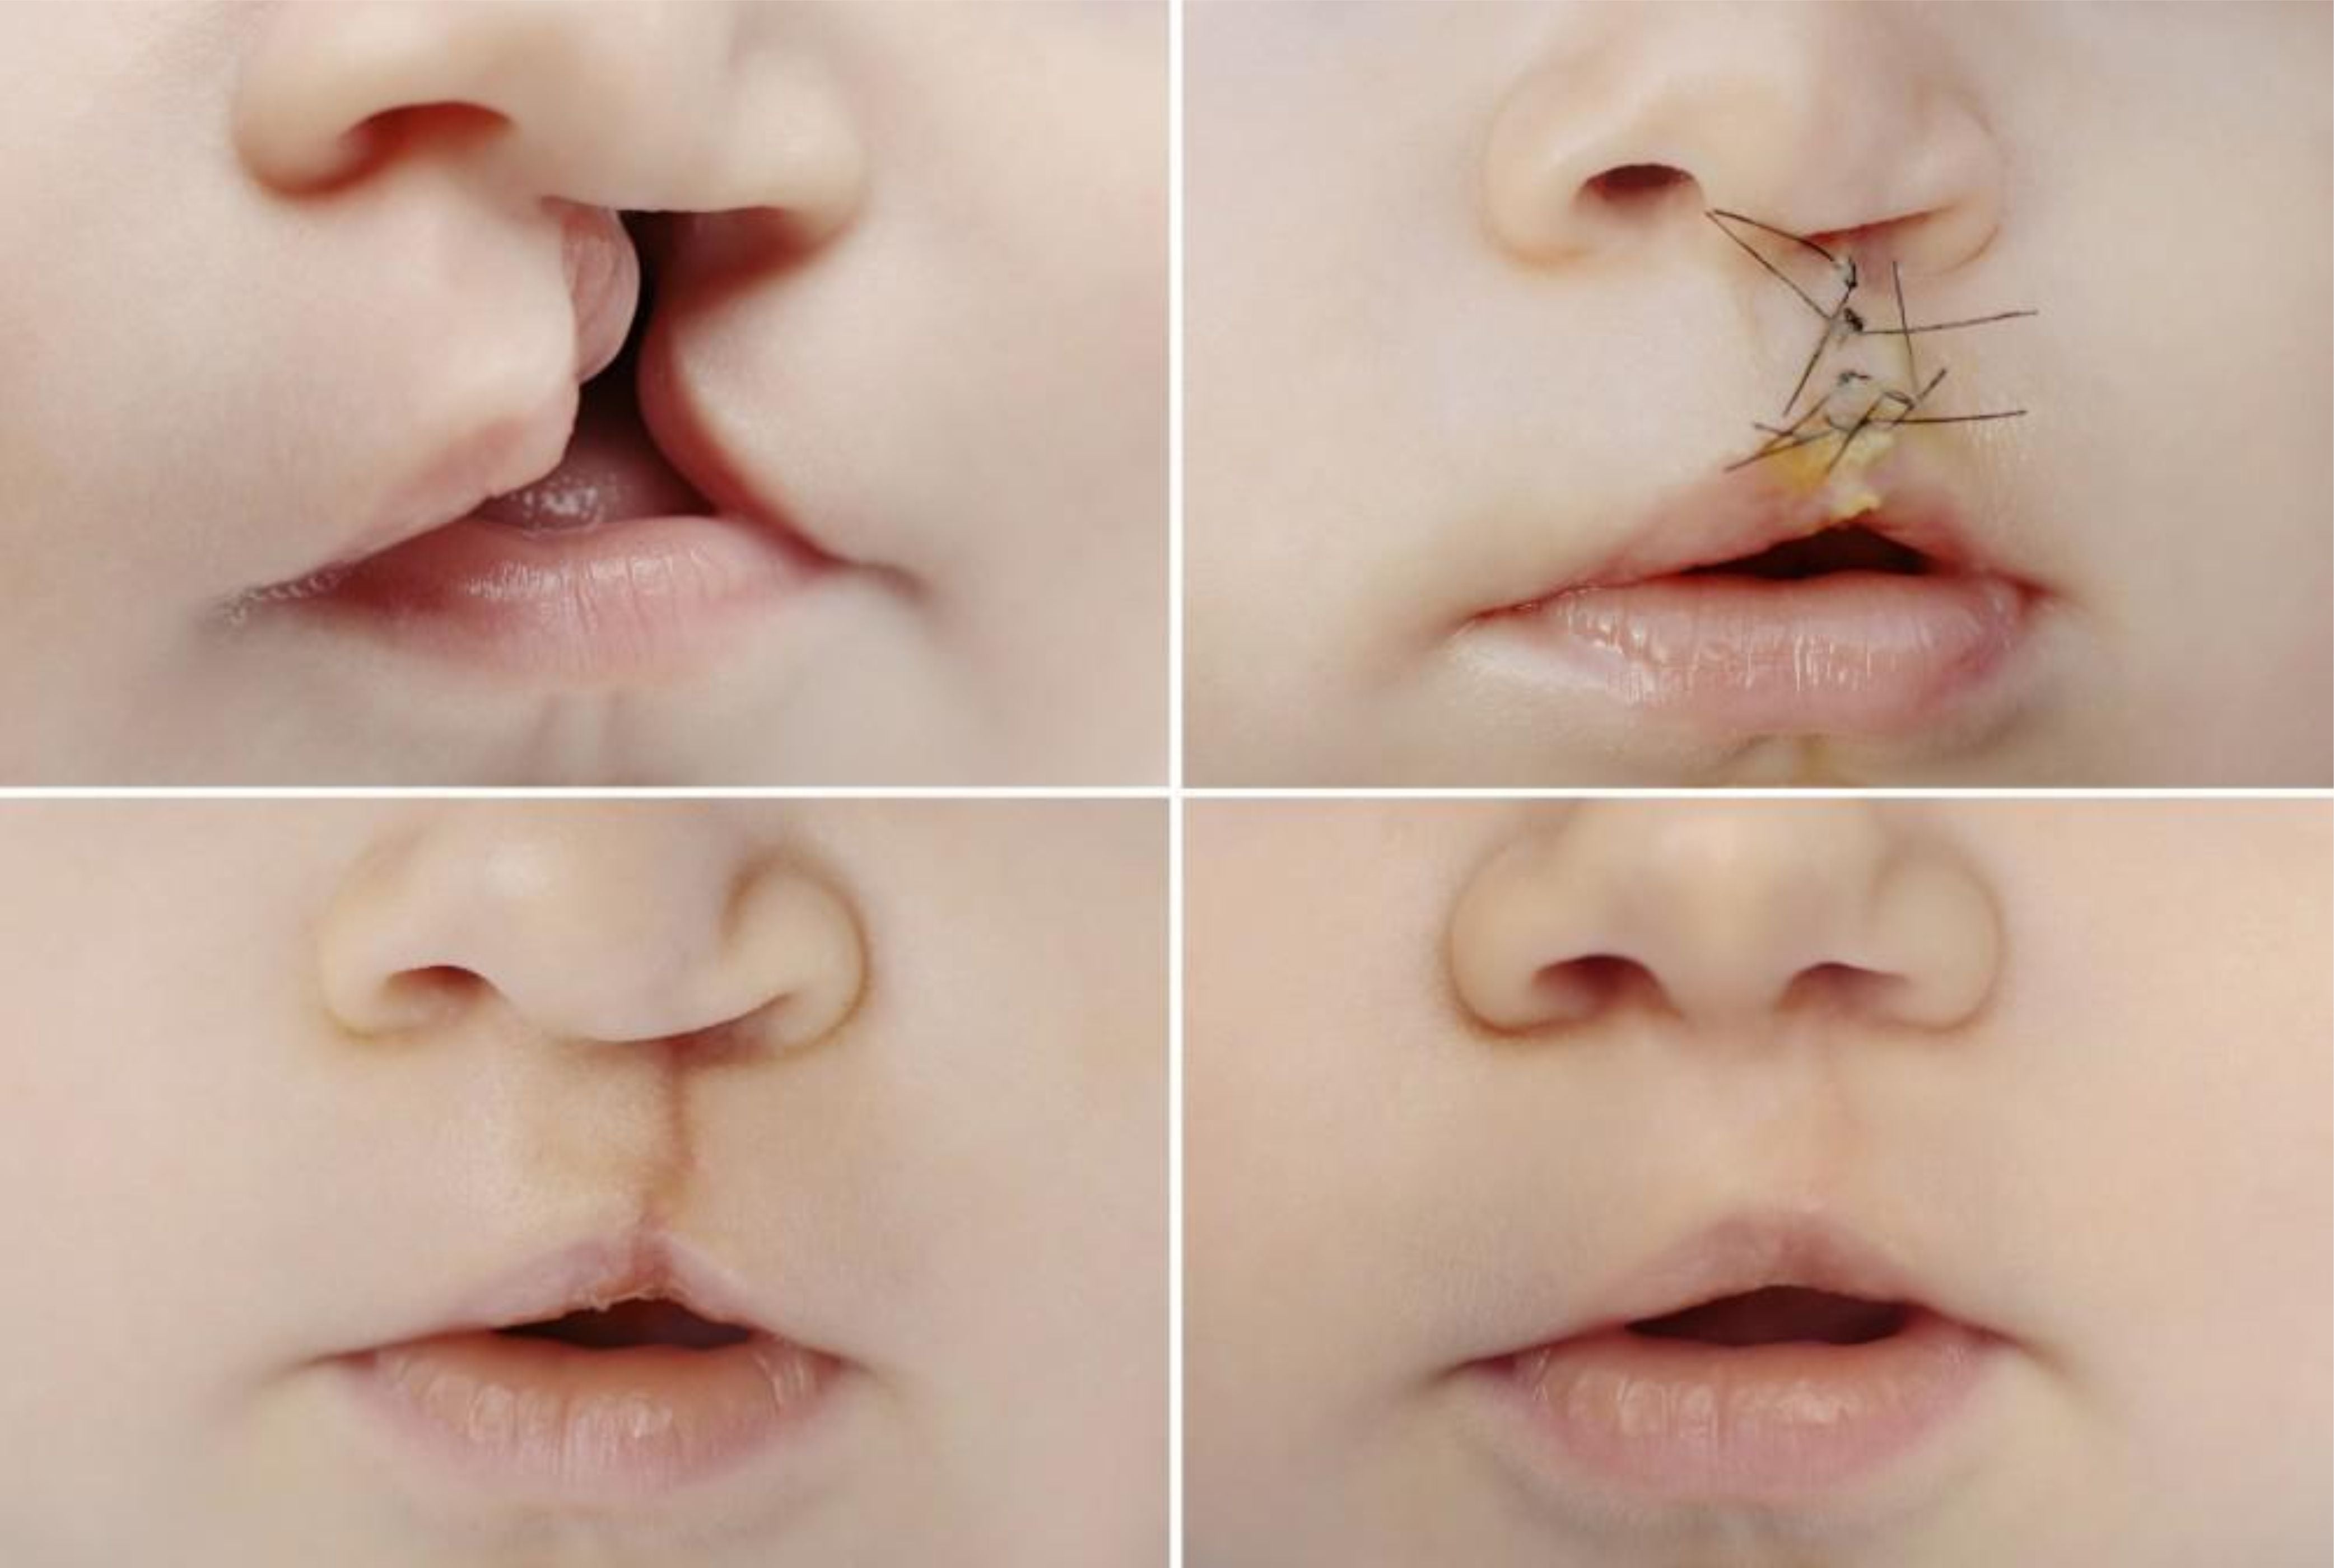 Understanding Cleft Lip and Palate: What to Expect Before, During, and After the Procedure